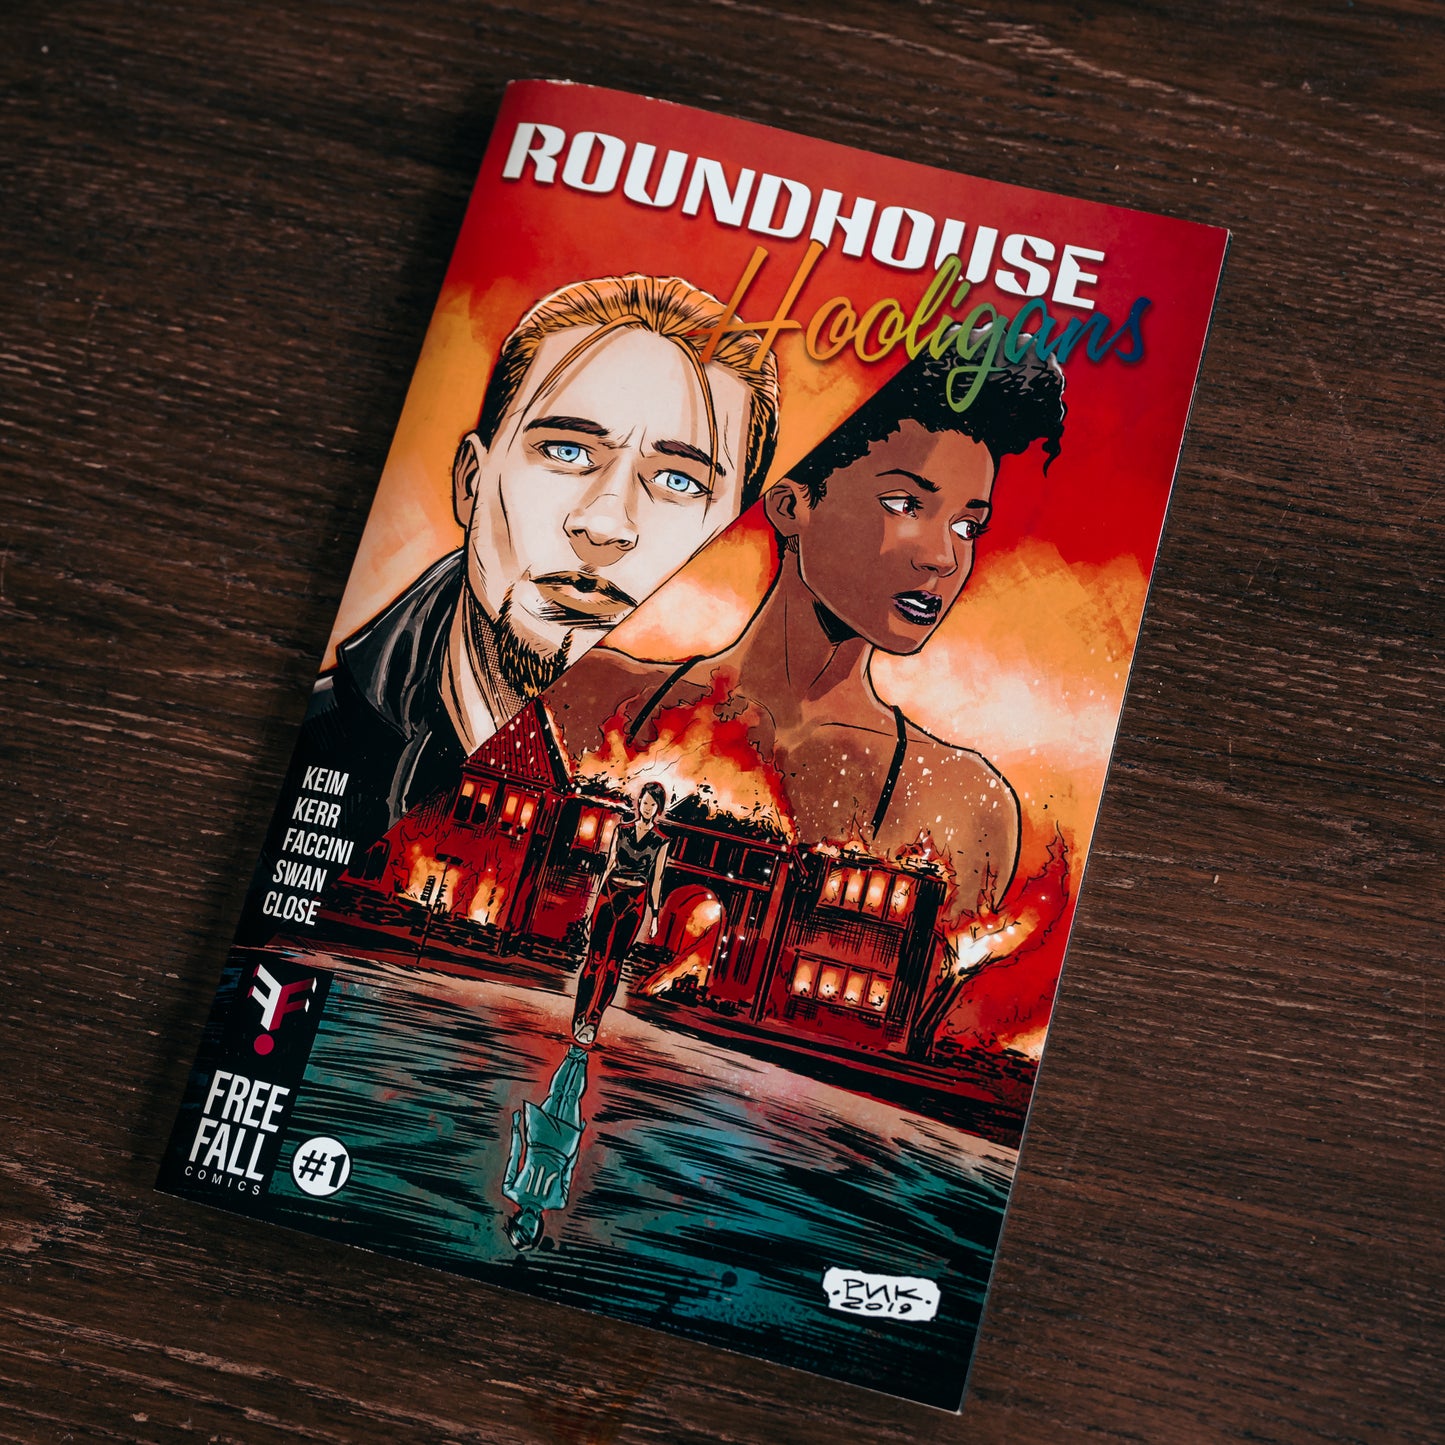 Roundhouse Hooligans Issue#1 Printed + Roundhouse Hooligans Issue#2 Printed